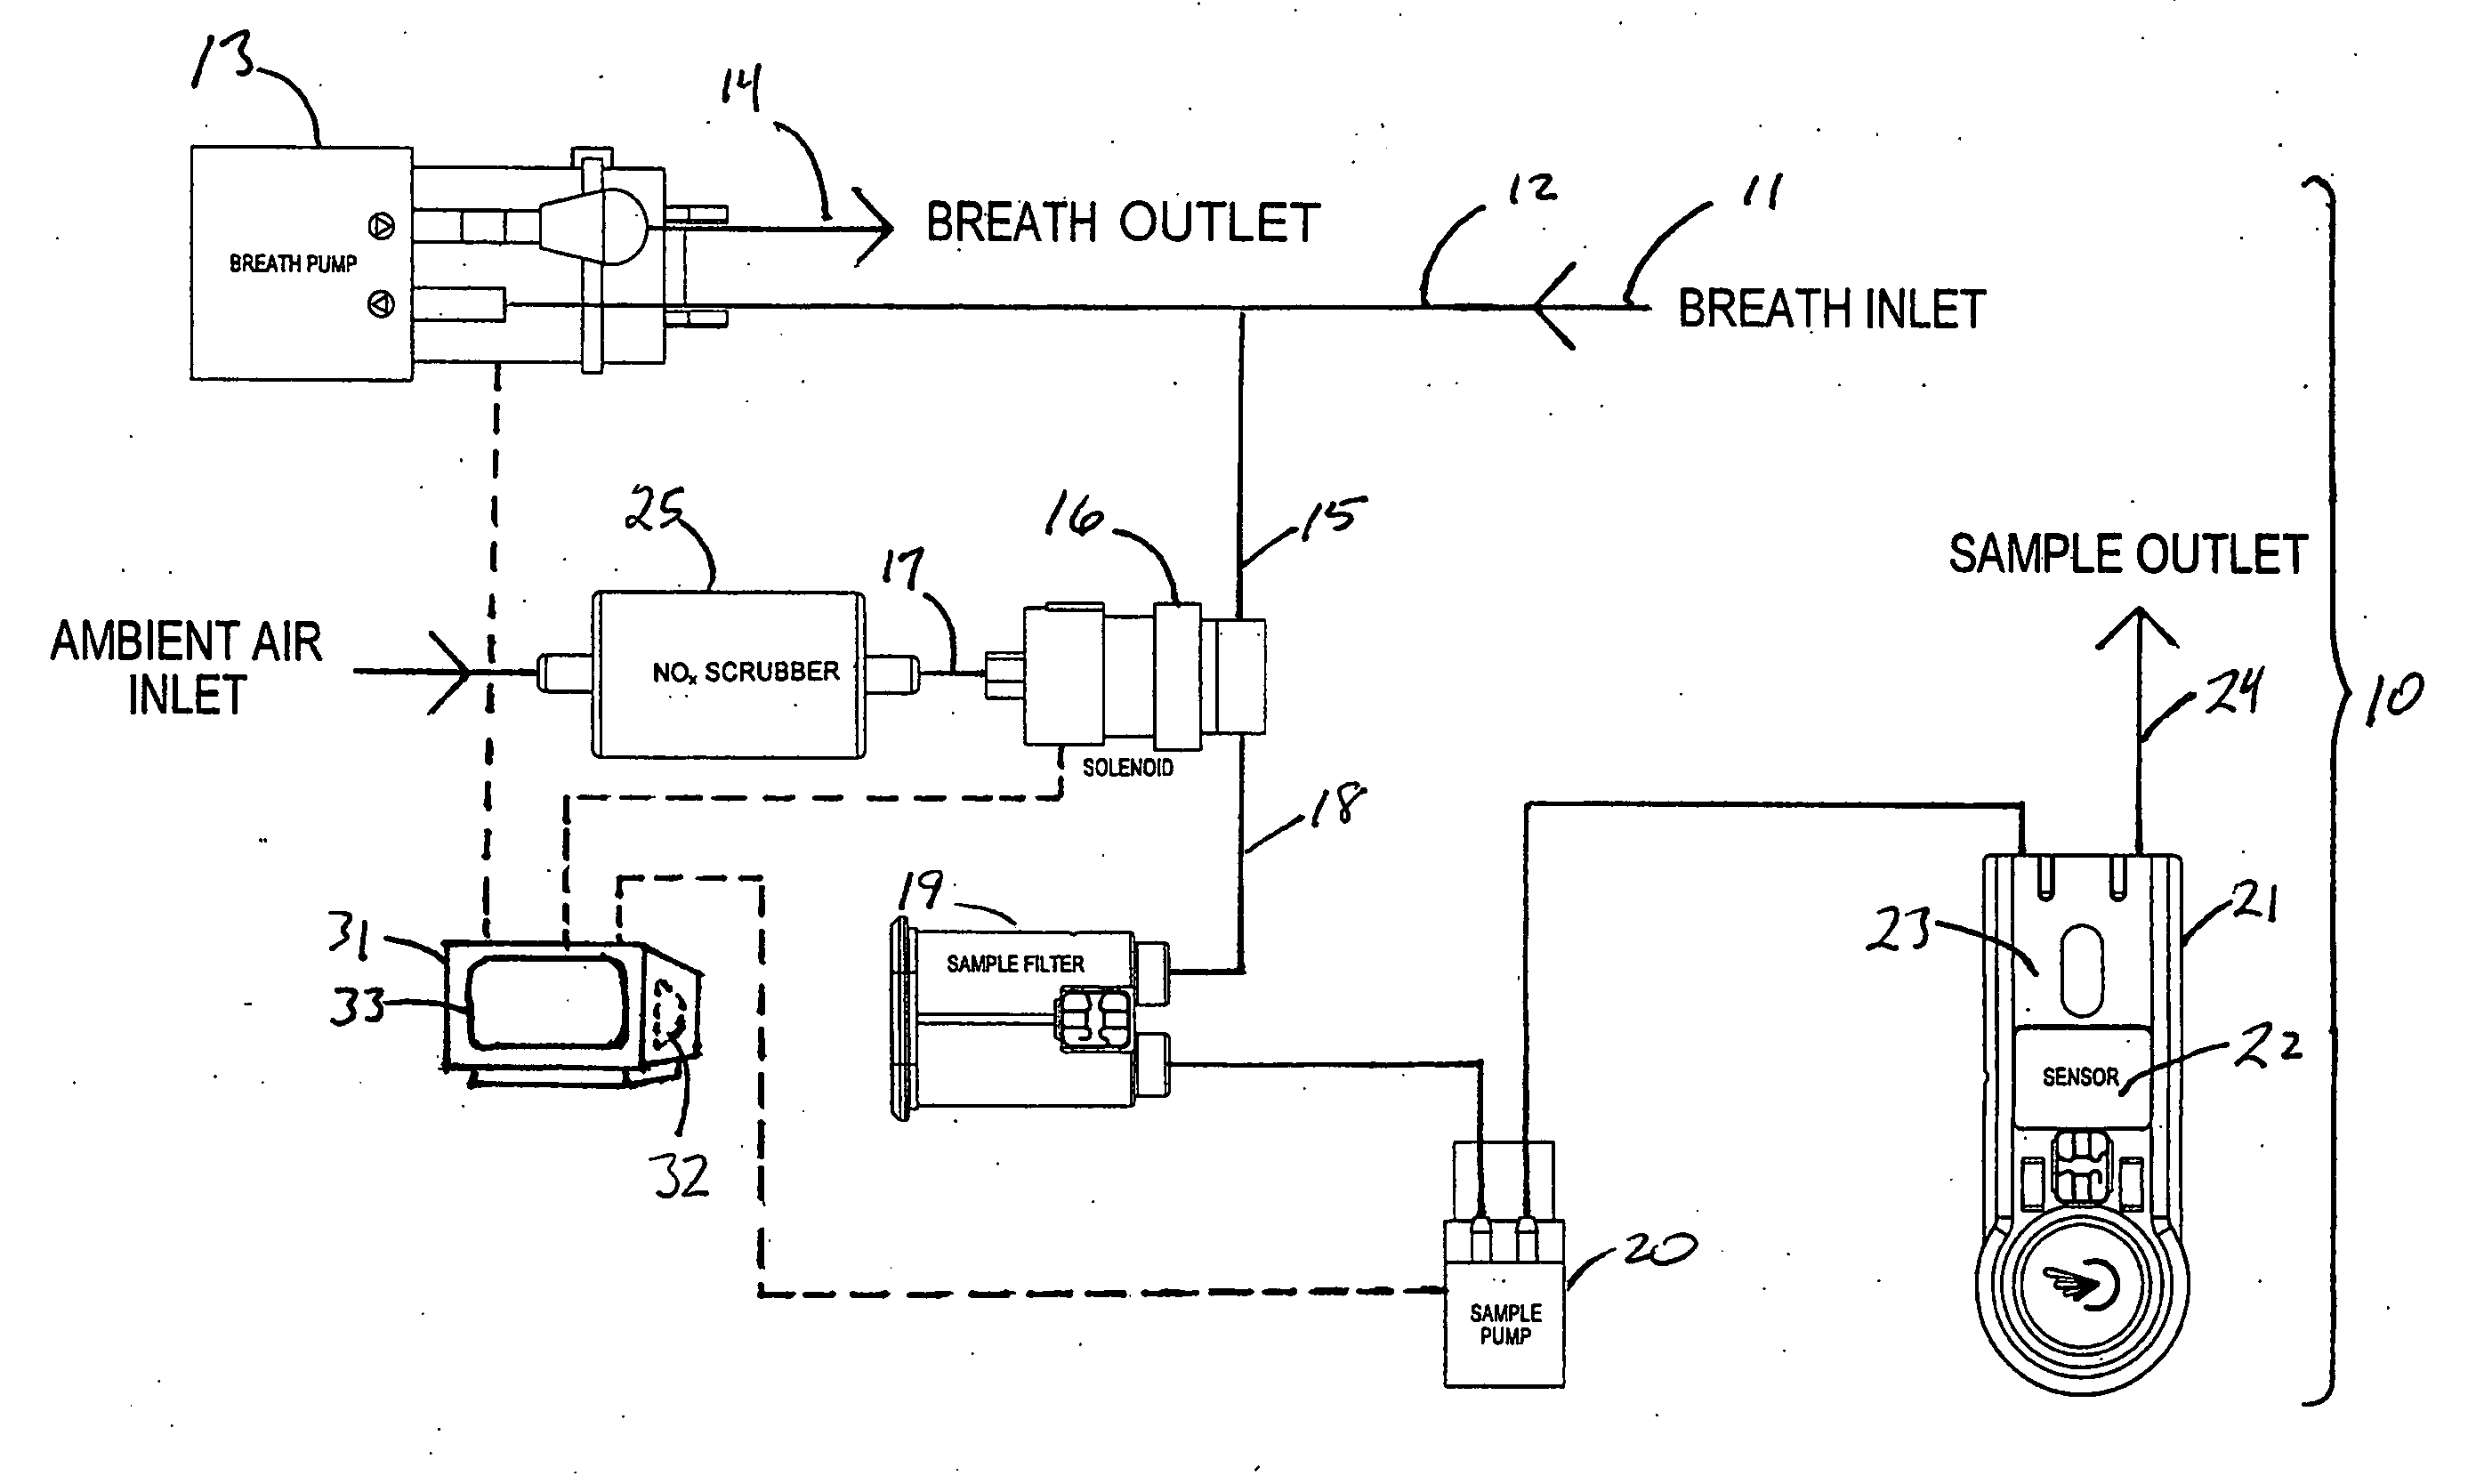 Analyzer for Nitric Oxide in Exhaled Breath with Multiple-Use Sensor